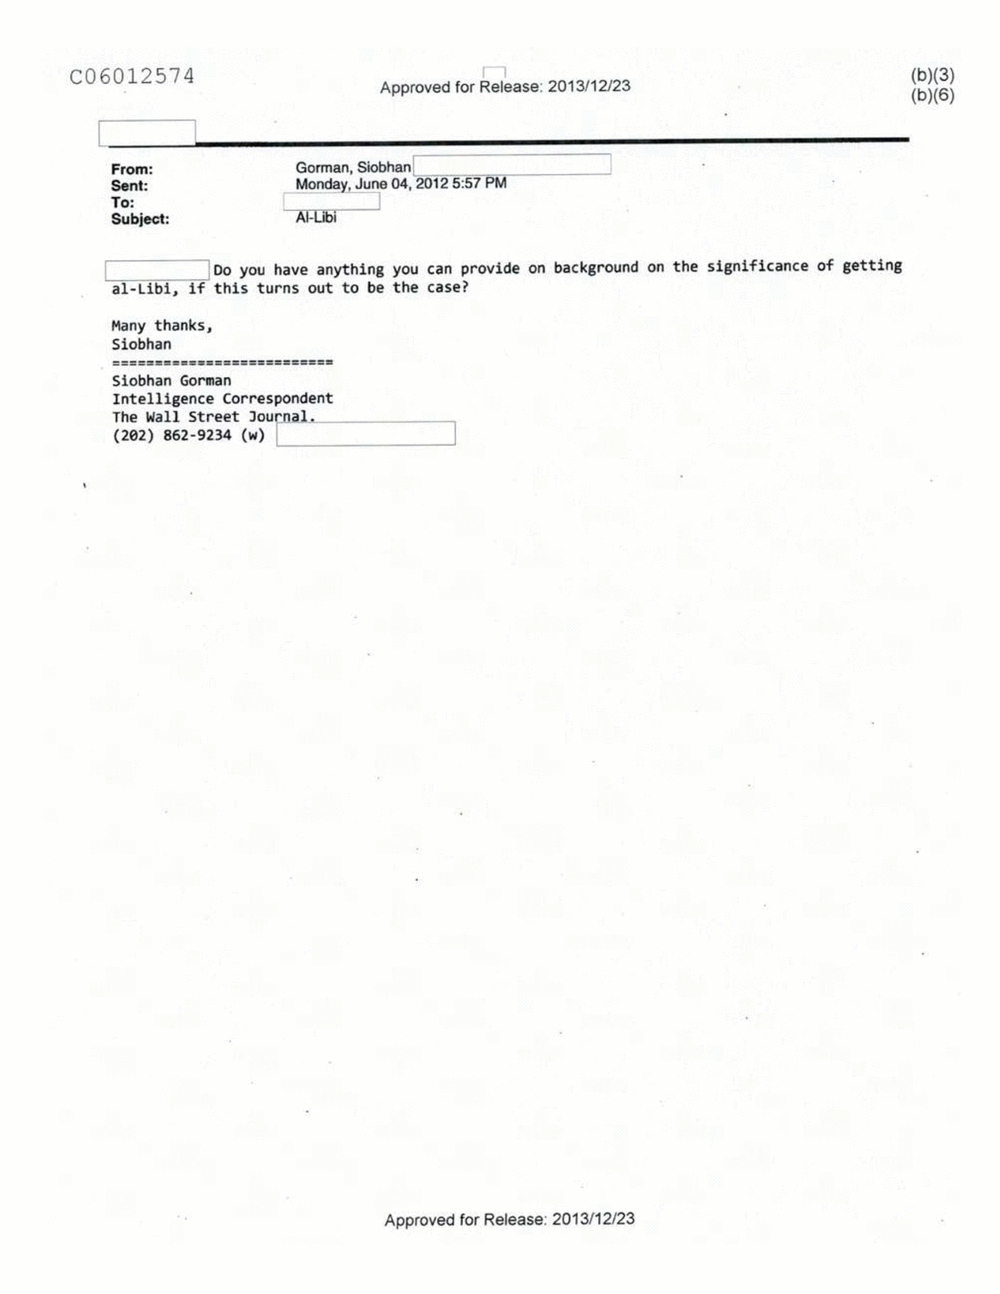 Page 109 from Email Correspondence Between Reporters and CIA Flacks